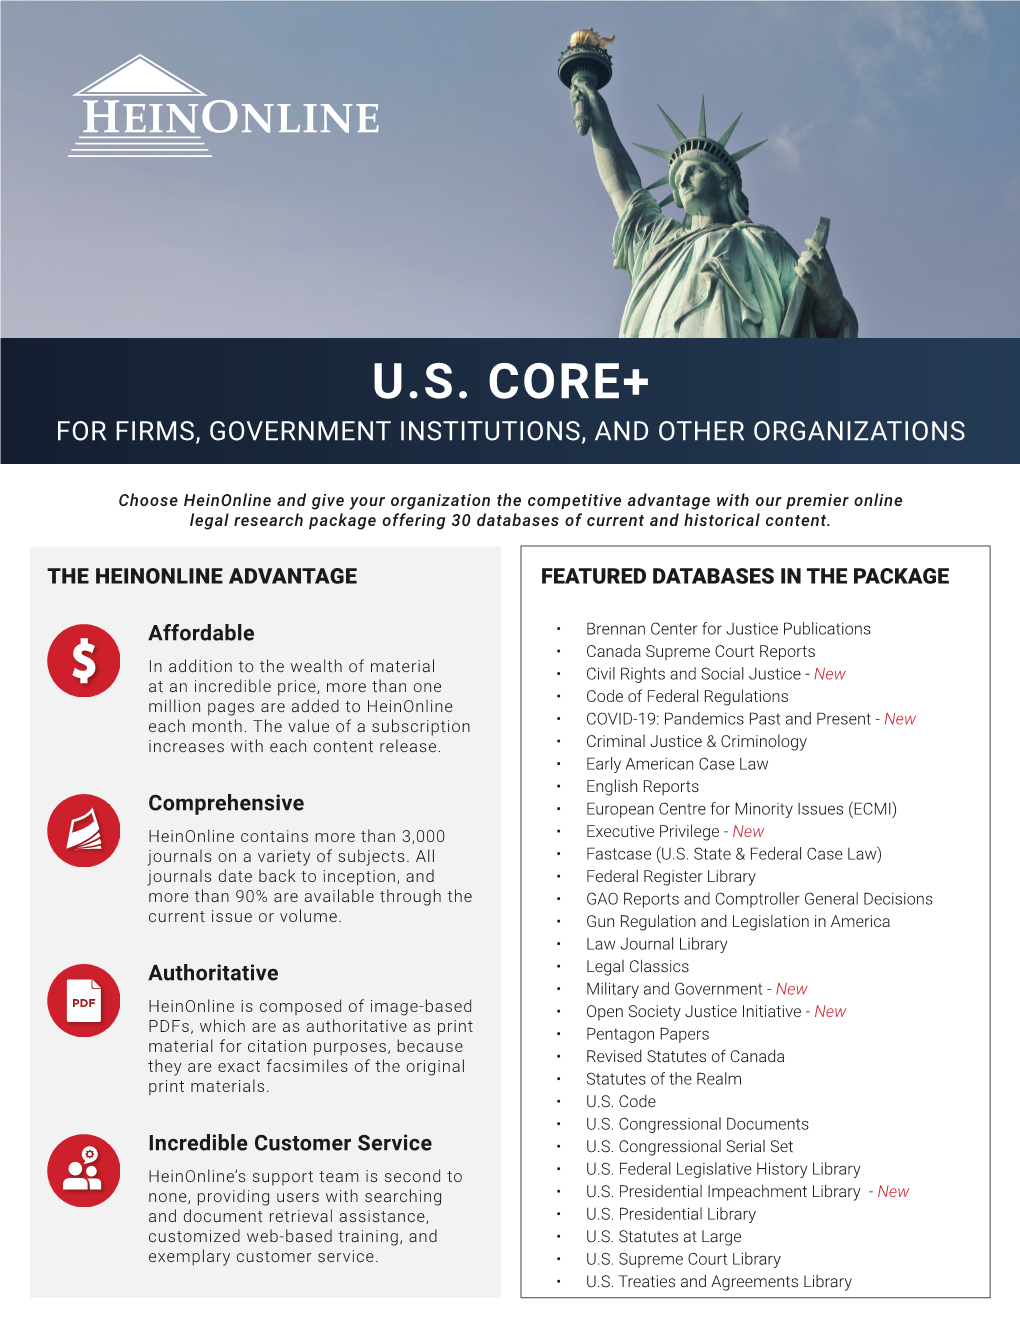 U.S. Core+ for Firms, Government Institutions, and Other Organizations